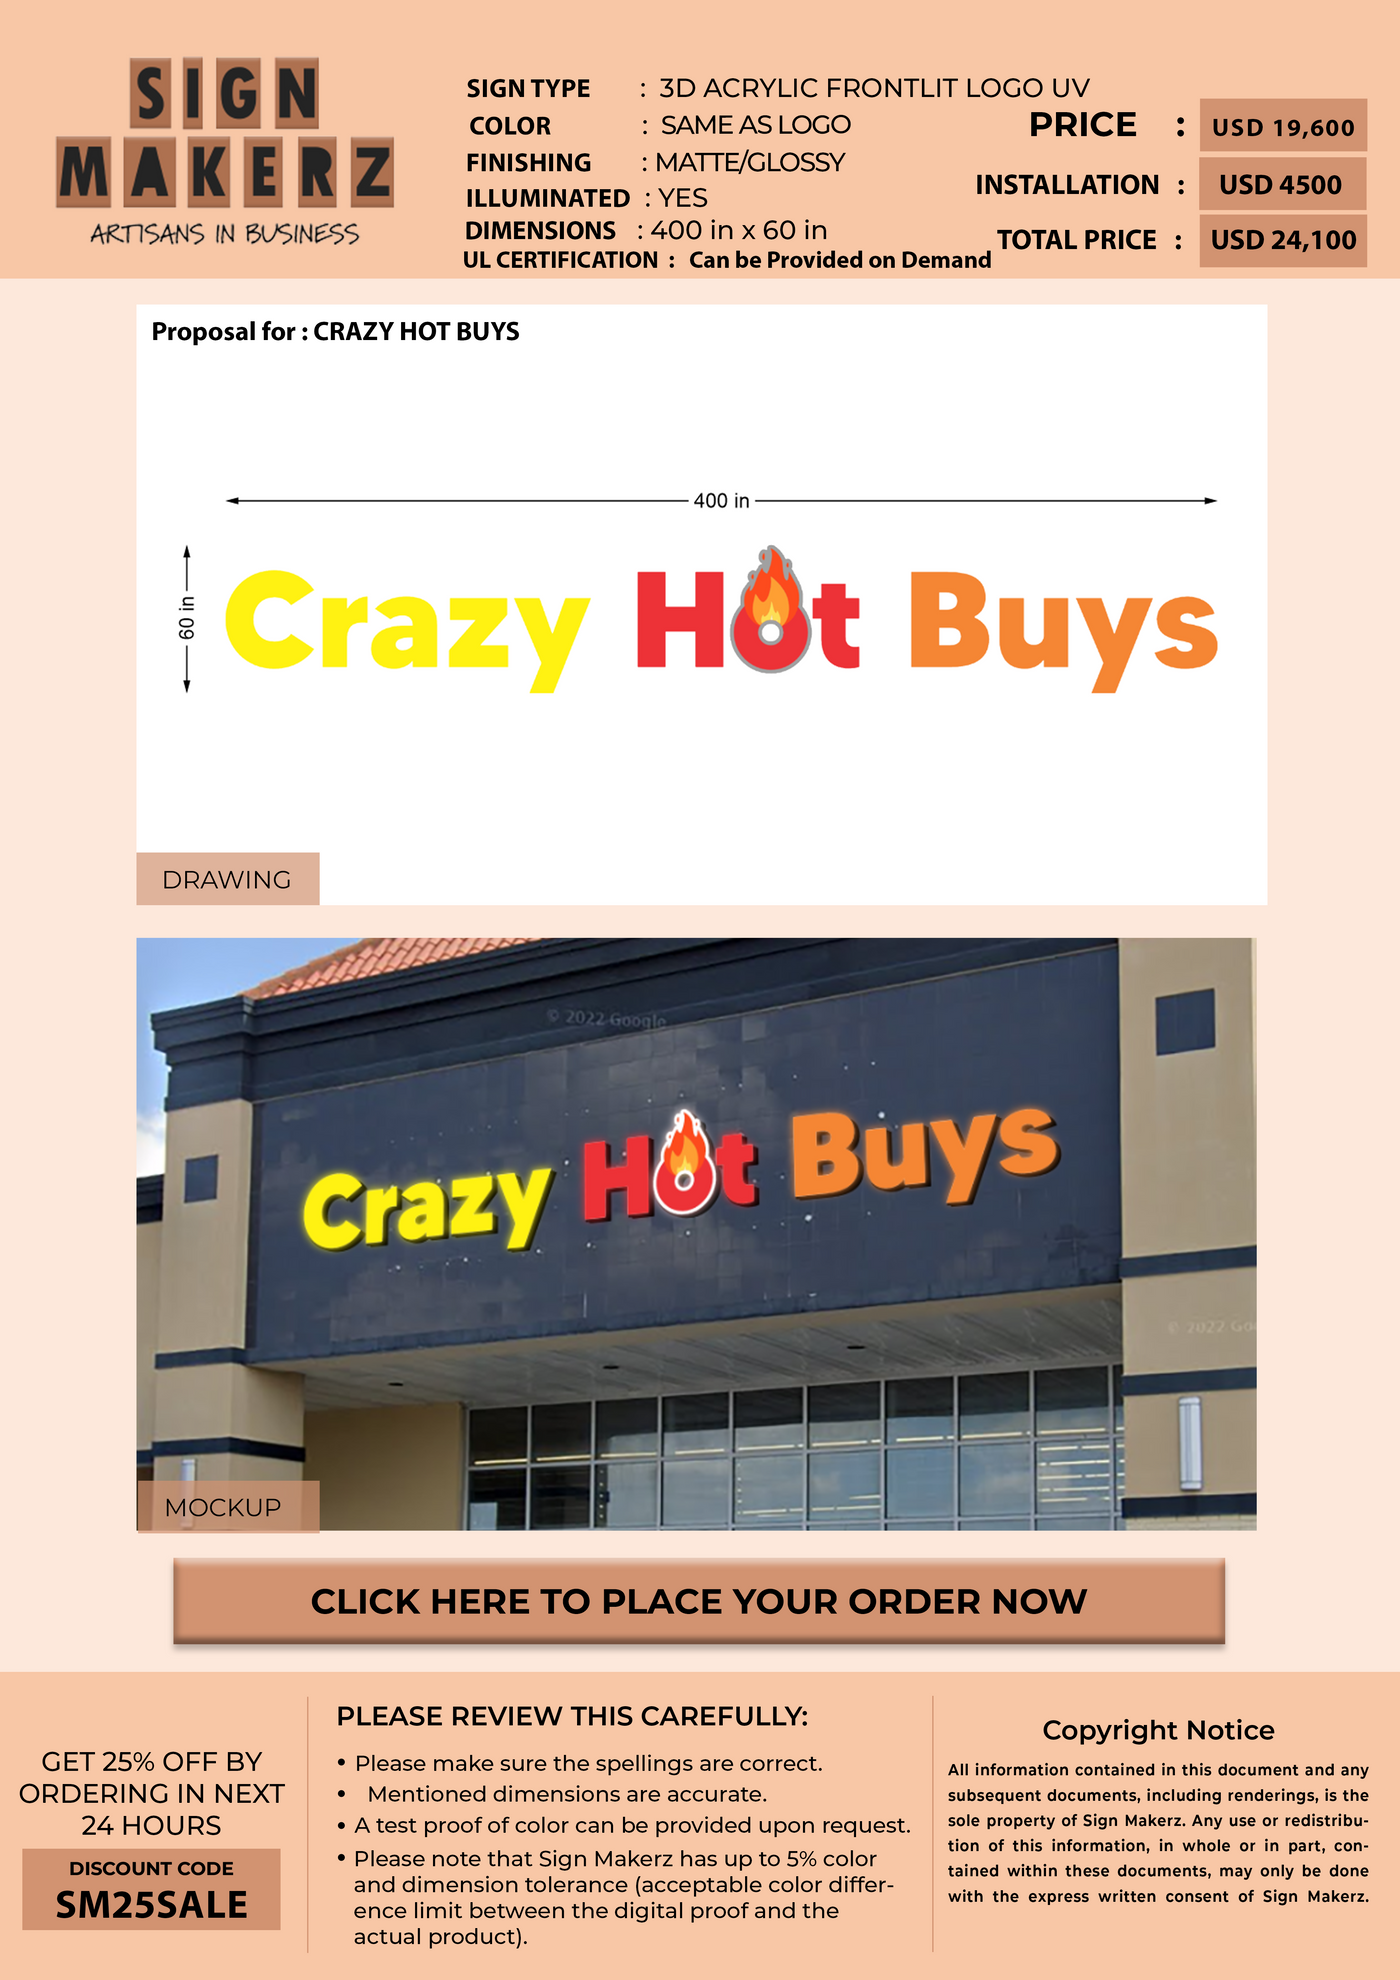 3D UV Acrylic Frontlit sign for CRAZY HOT BUYS